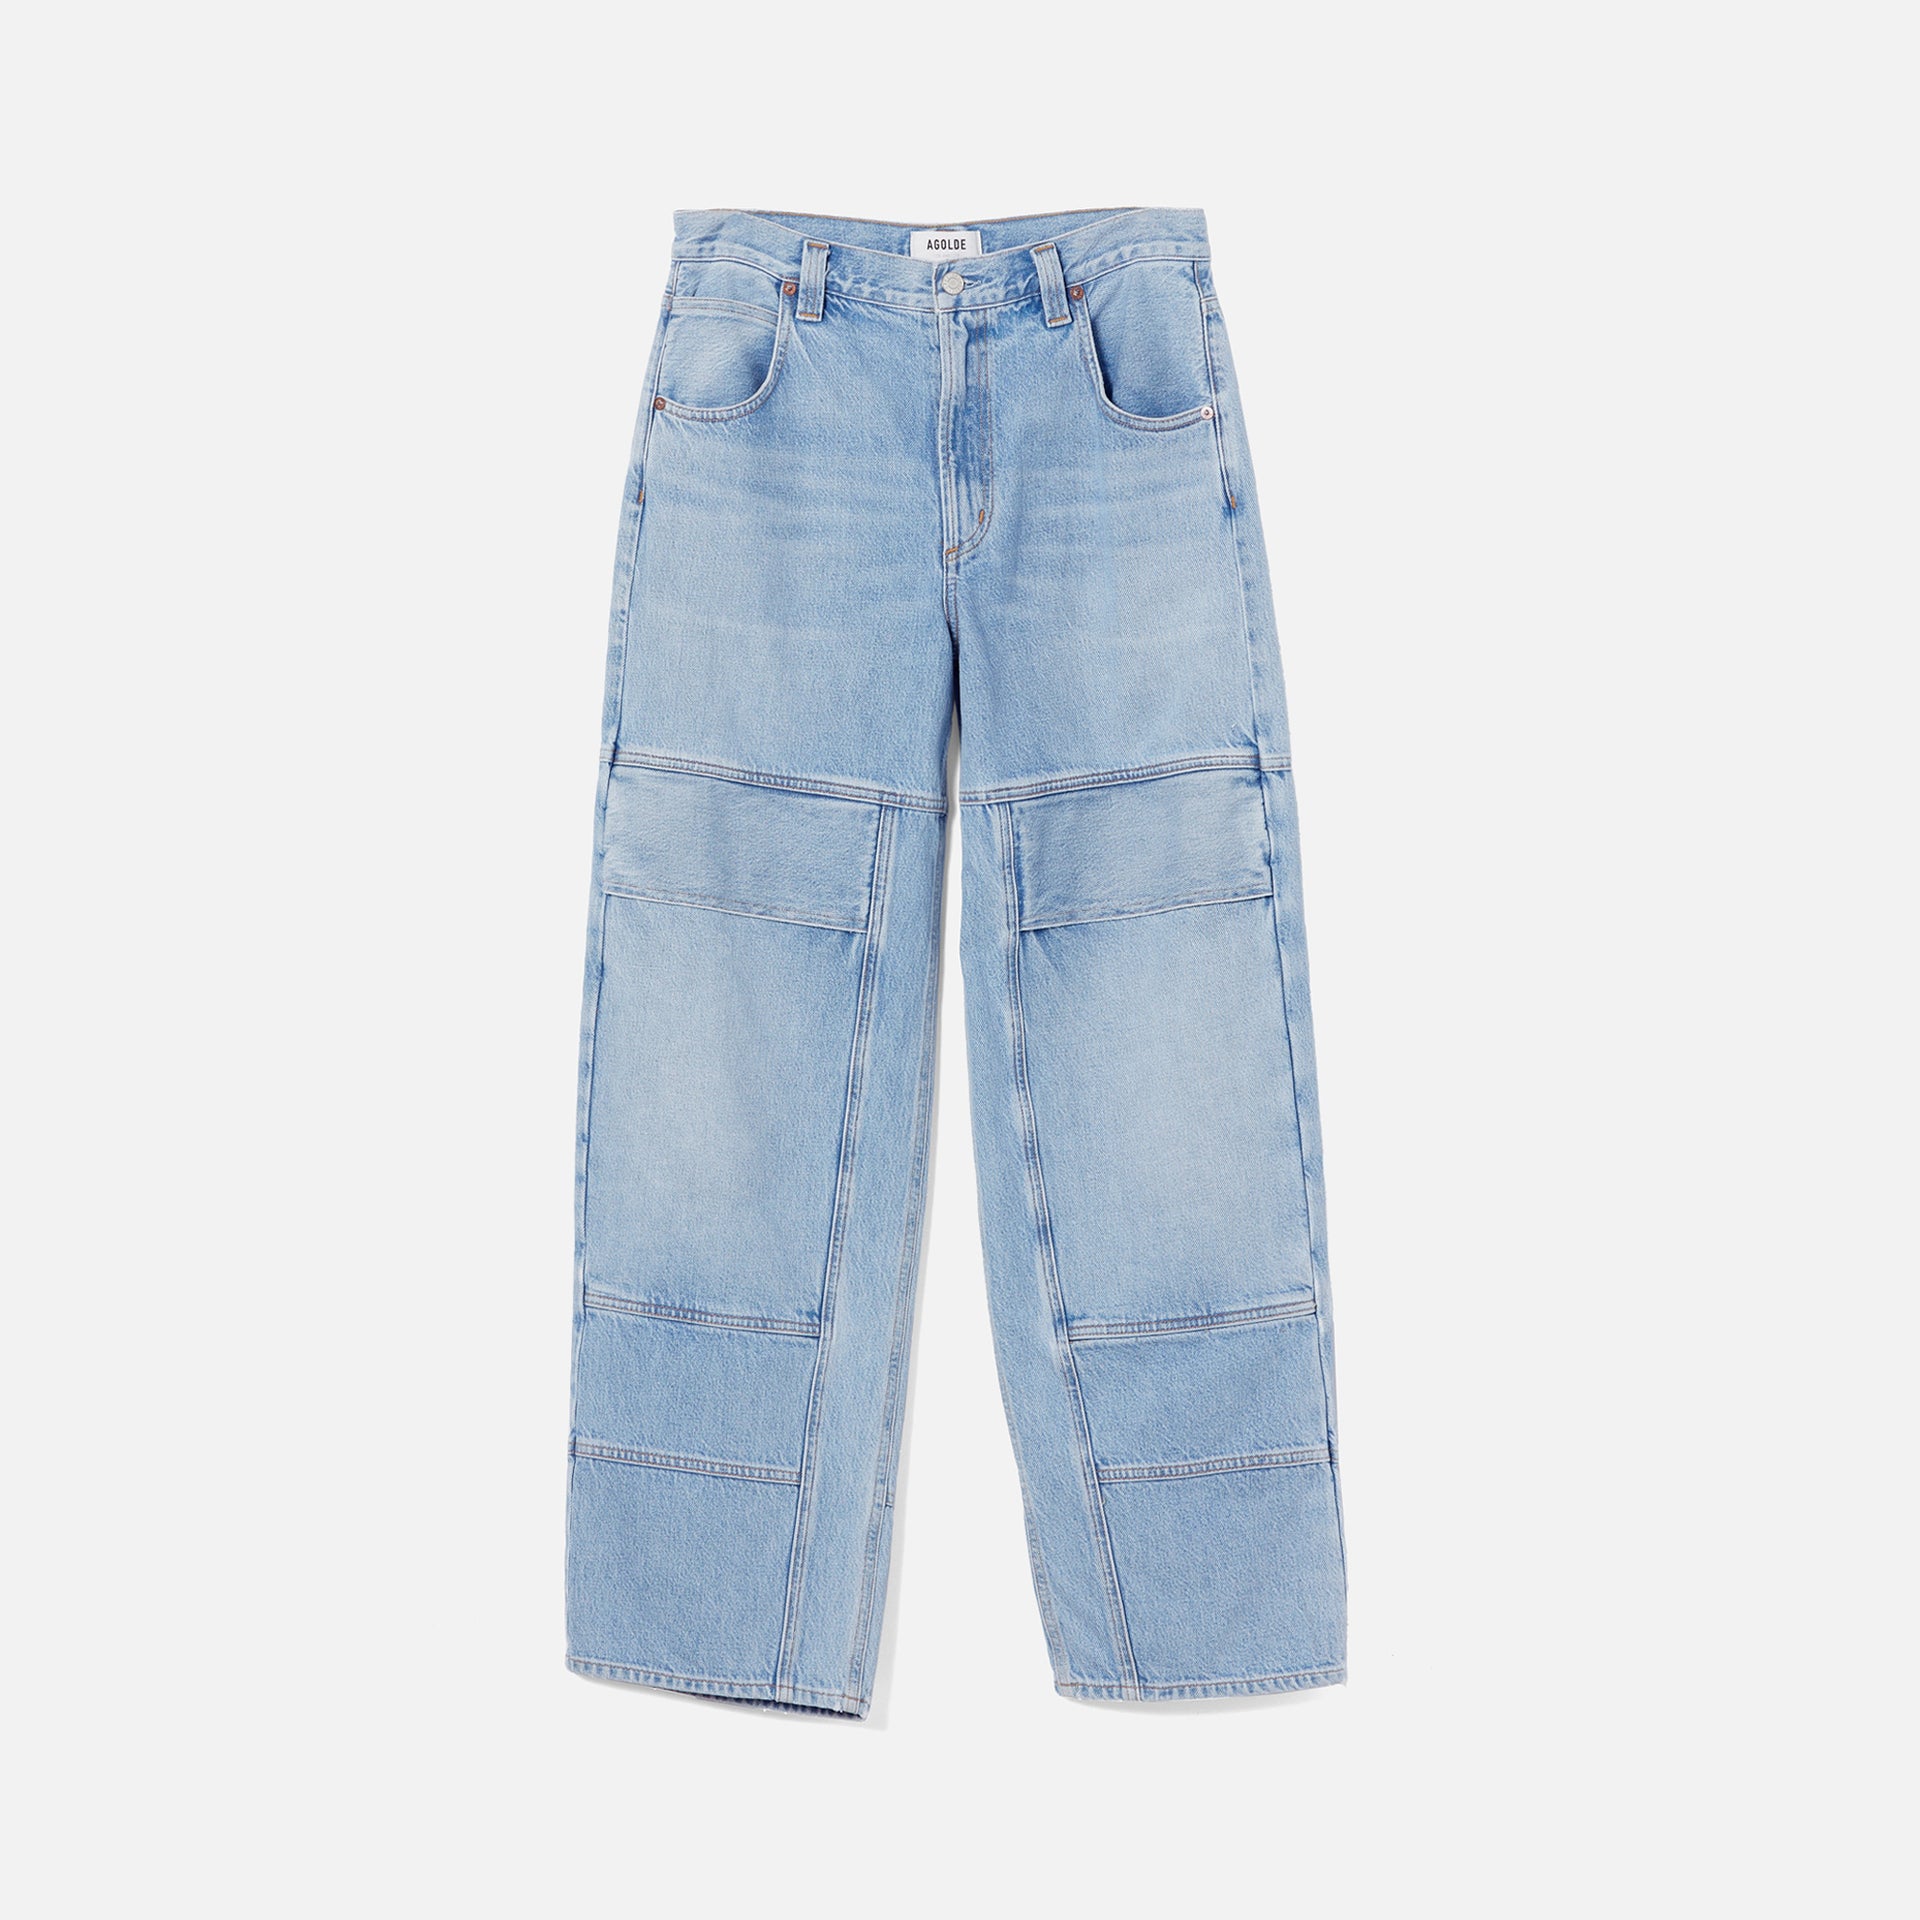 Agolde Tanis Utility Jean - Conflict